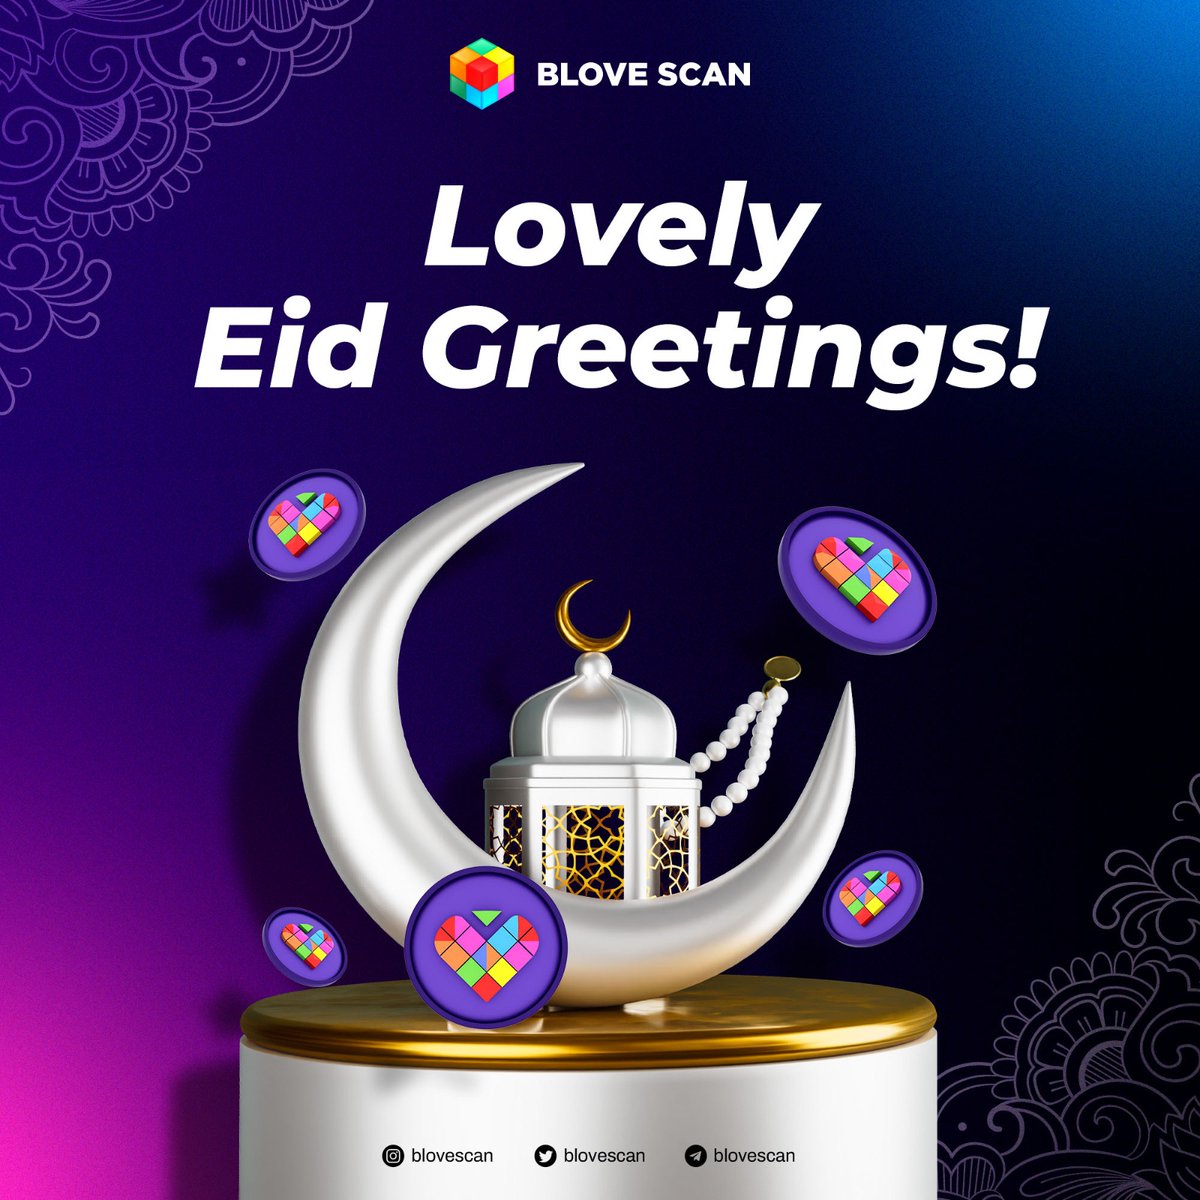 BLOVE SCAN wishes you a happy and prosperous Eid-ul-Fitr 🌙 May Allah's blessings light up your path and lead you to happiness and success. May you be filled with joy and blessings!⚡